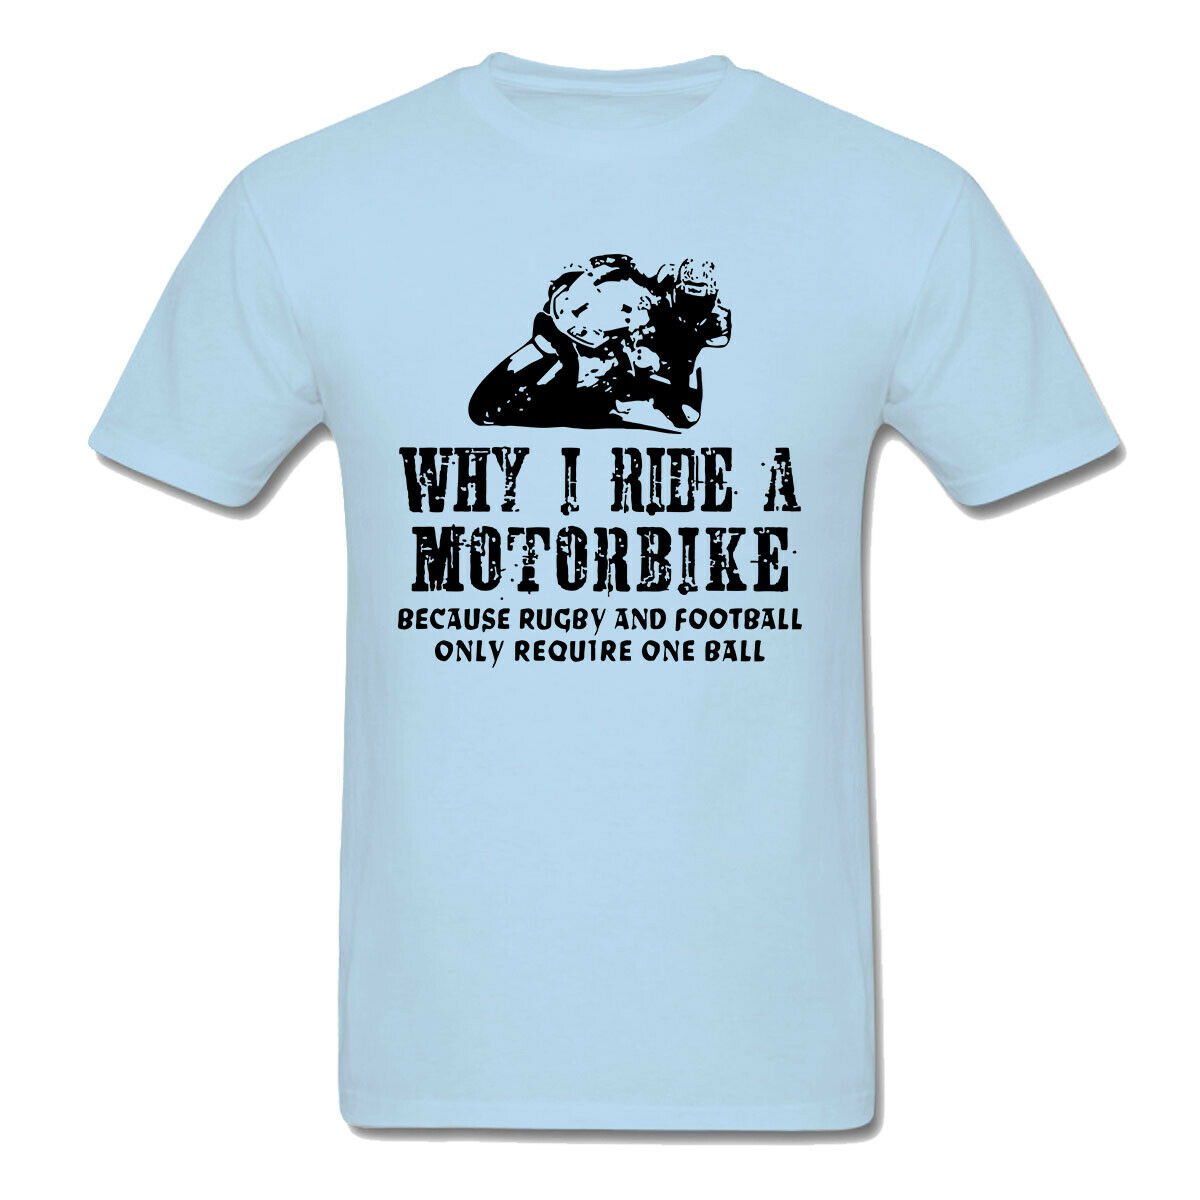 Funny Men's T-shirts Why I Ride A Motorbike Hilarious Motorcycle Black Tshirt 